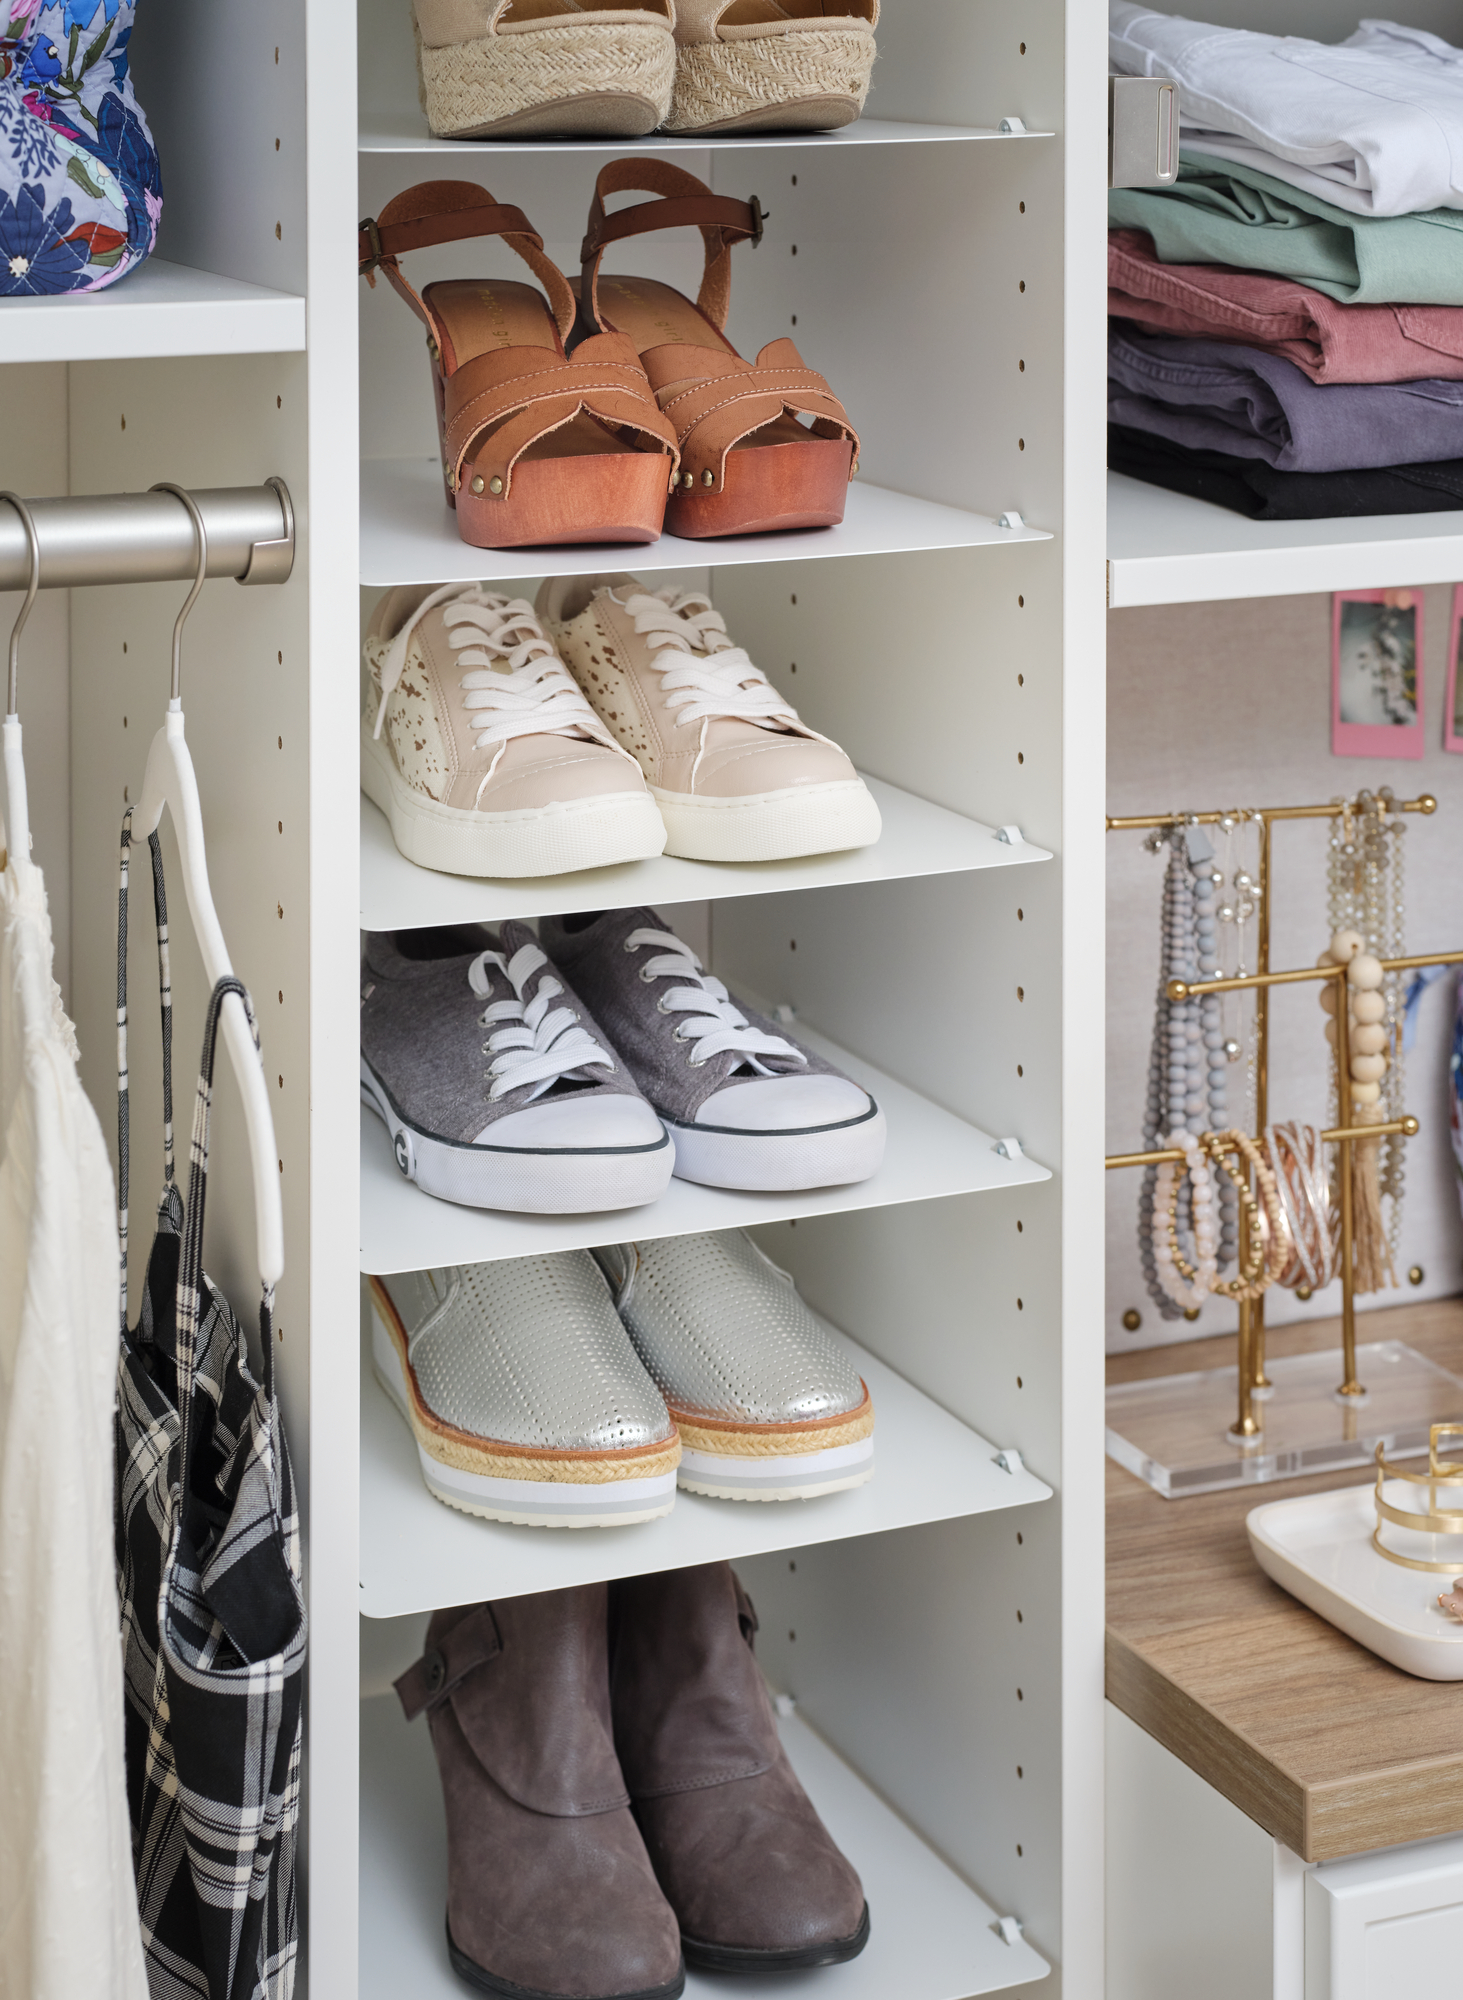 Adjustable shoe storage in white closet by Inspired Closets